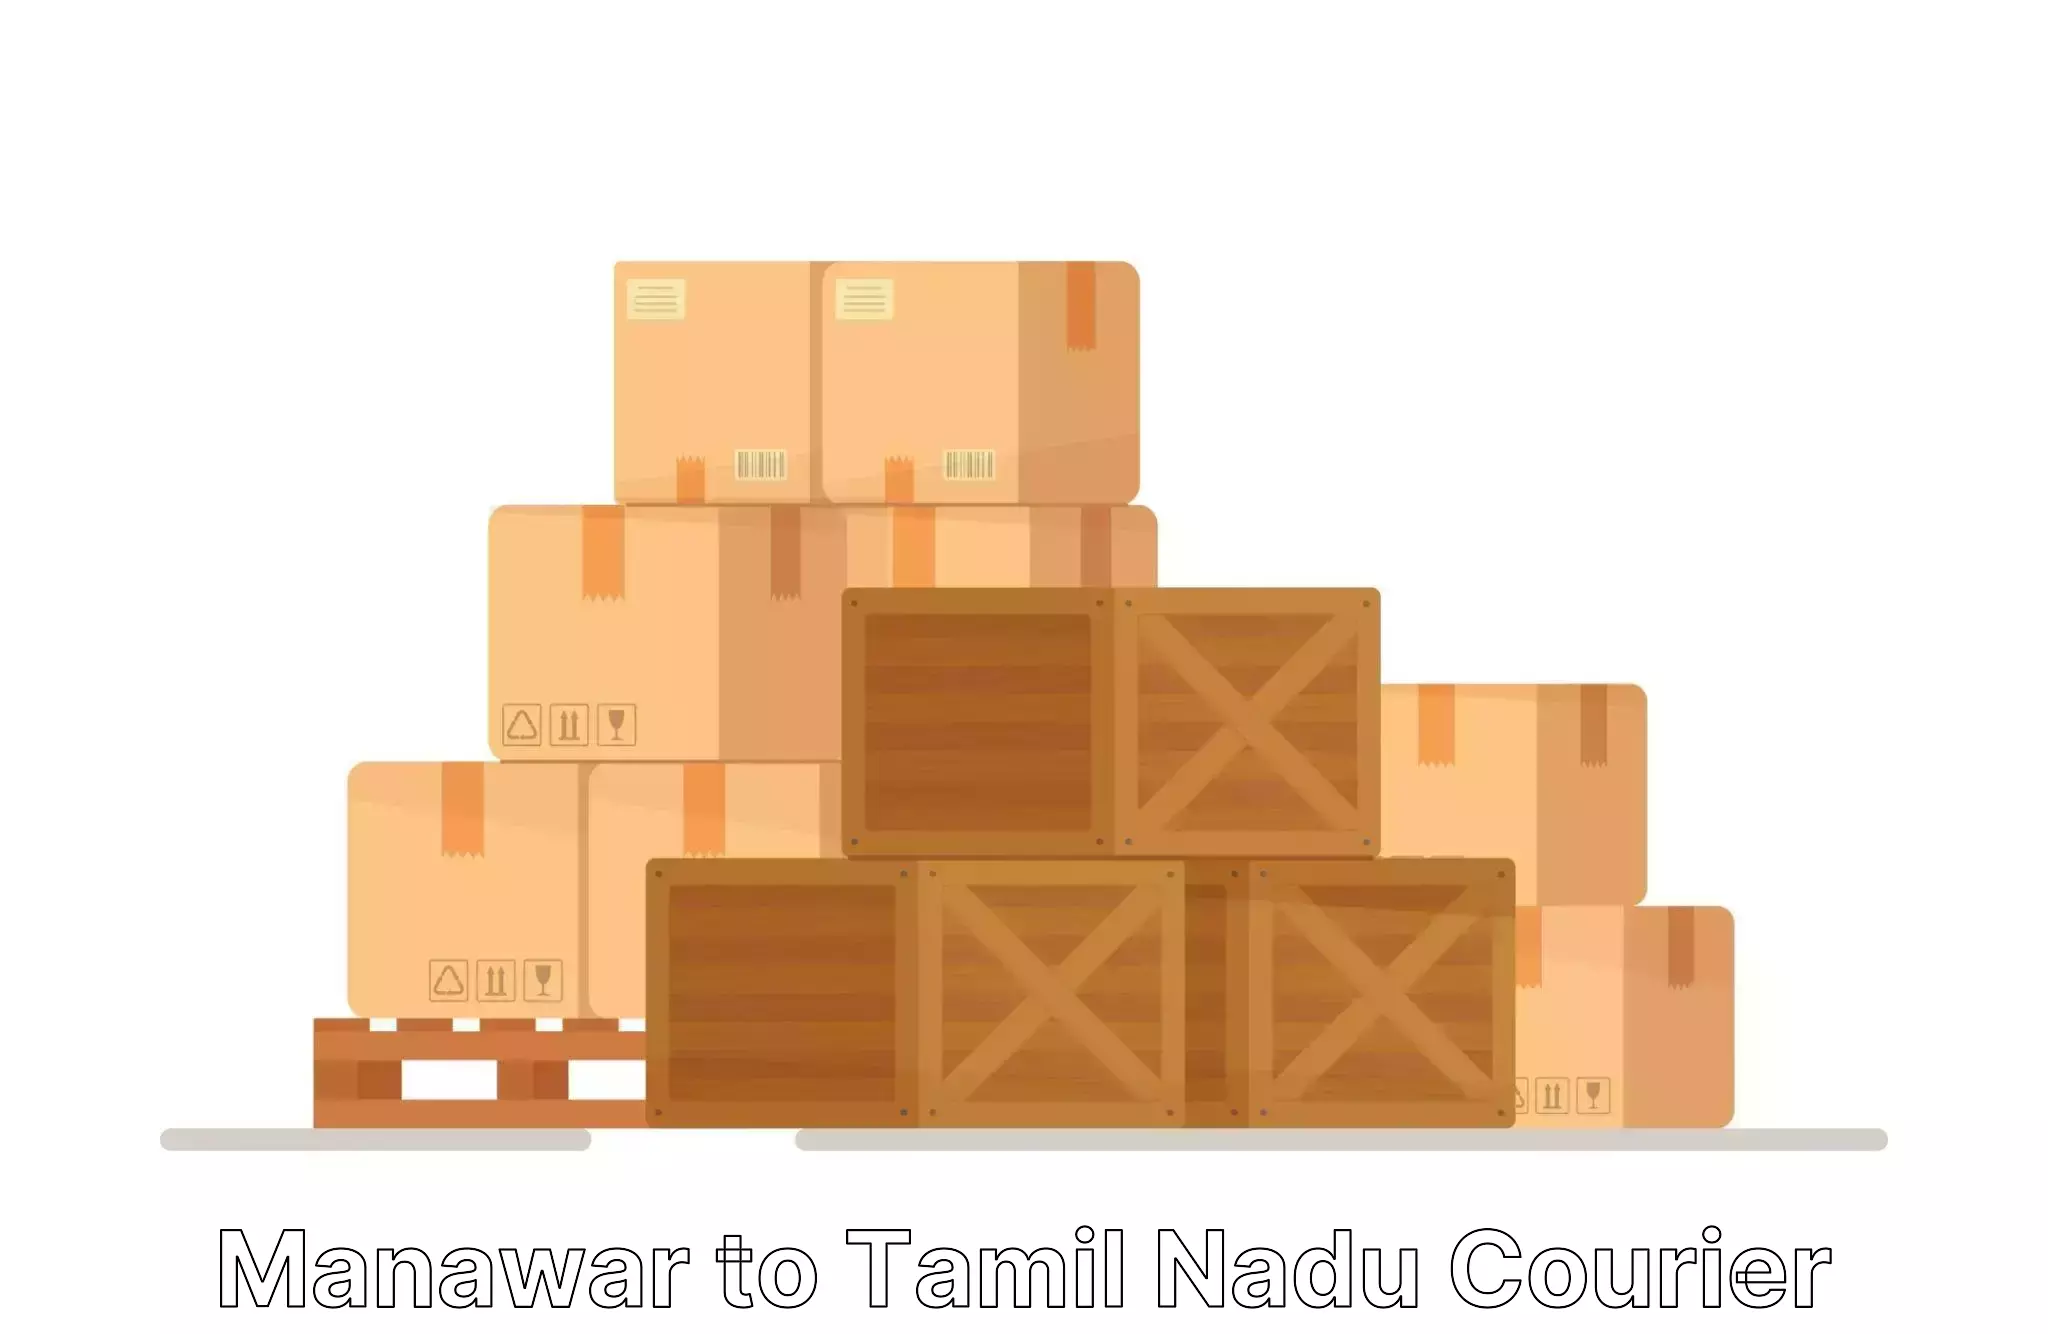 Moving and storage services Manawar to Ennore Port Chennai